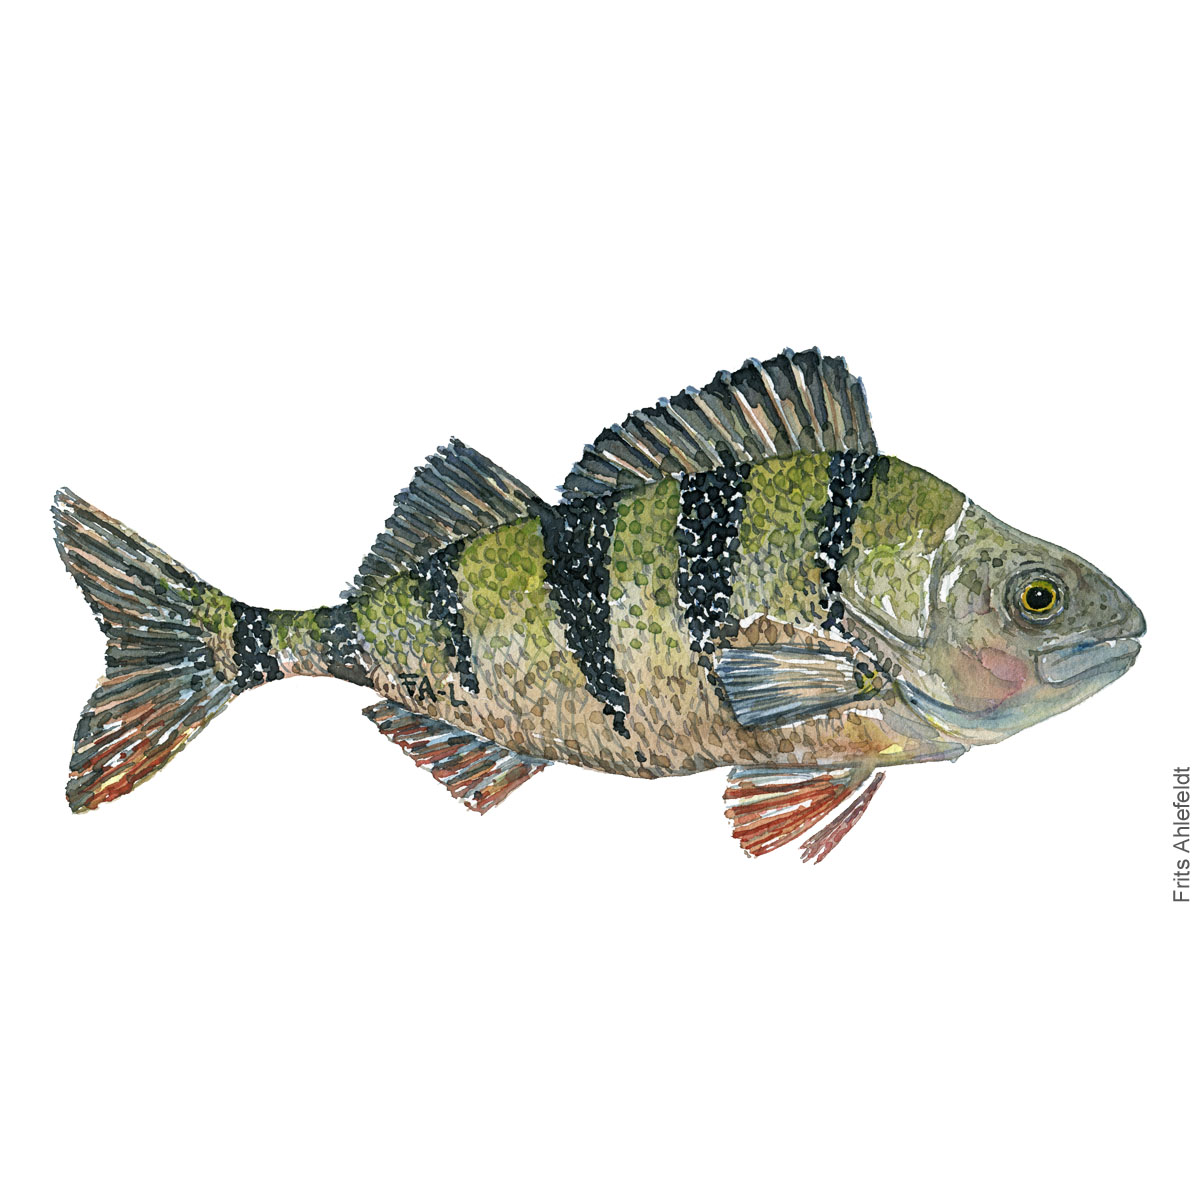 Aborre - Perch Fish painting in watercolor by Frits Ahlefeldt - Fiske akvarel